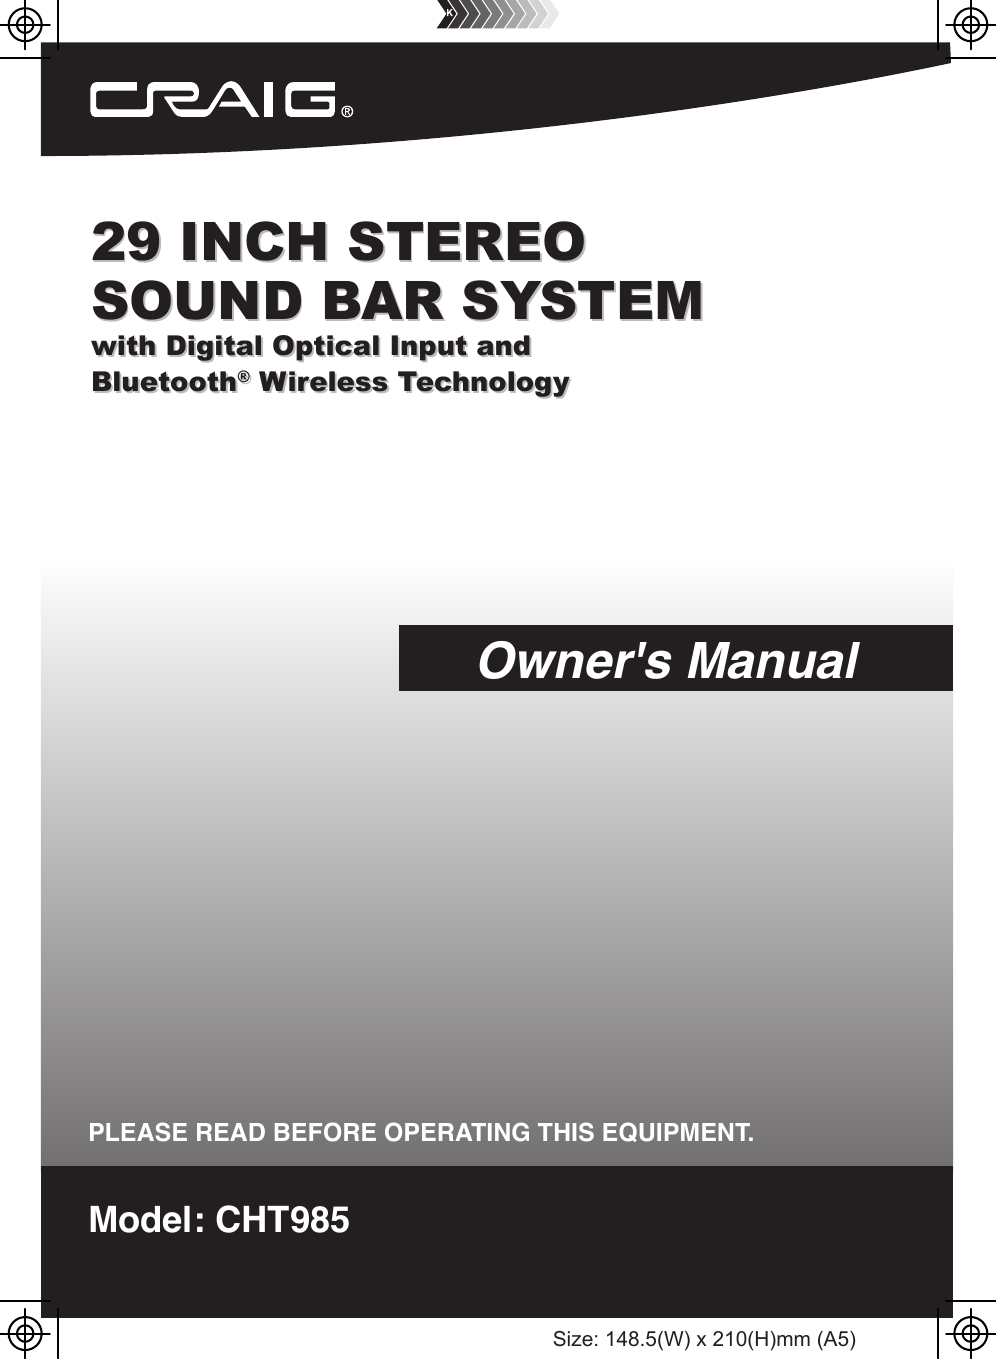 29 INCH STEREOSOUND BAR SYSTEMwith Digital Optical Input andBluetooth® Wireless TechnologyModel: CHT985PLEASE READ BEFORE OPERATING THIS EQUIPMENT.Owner&apos;s Manual29 INCH STEREOSOUND BAR SYSTEMwith Digital Optical Input andBluetooth® Wireless TechnologySize: 148.5(W) x 210(H)mm (A5)